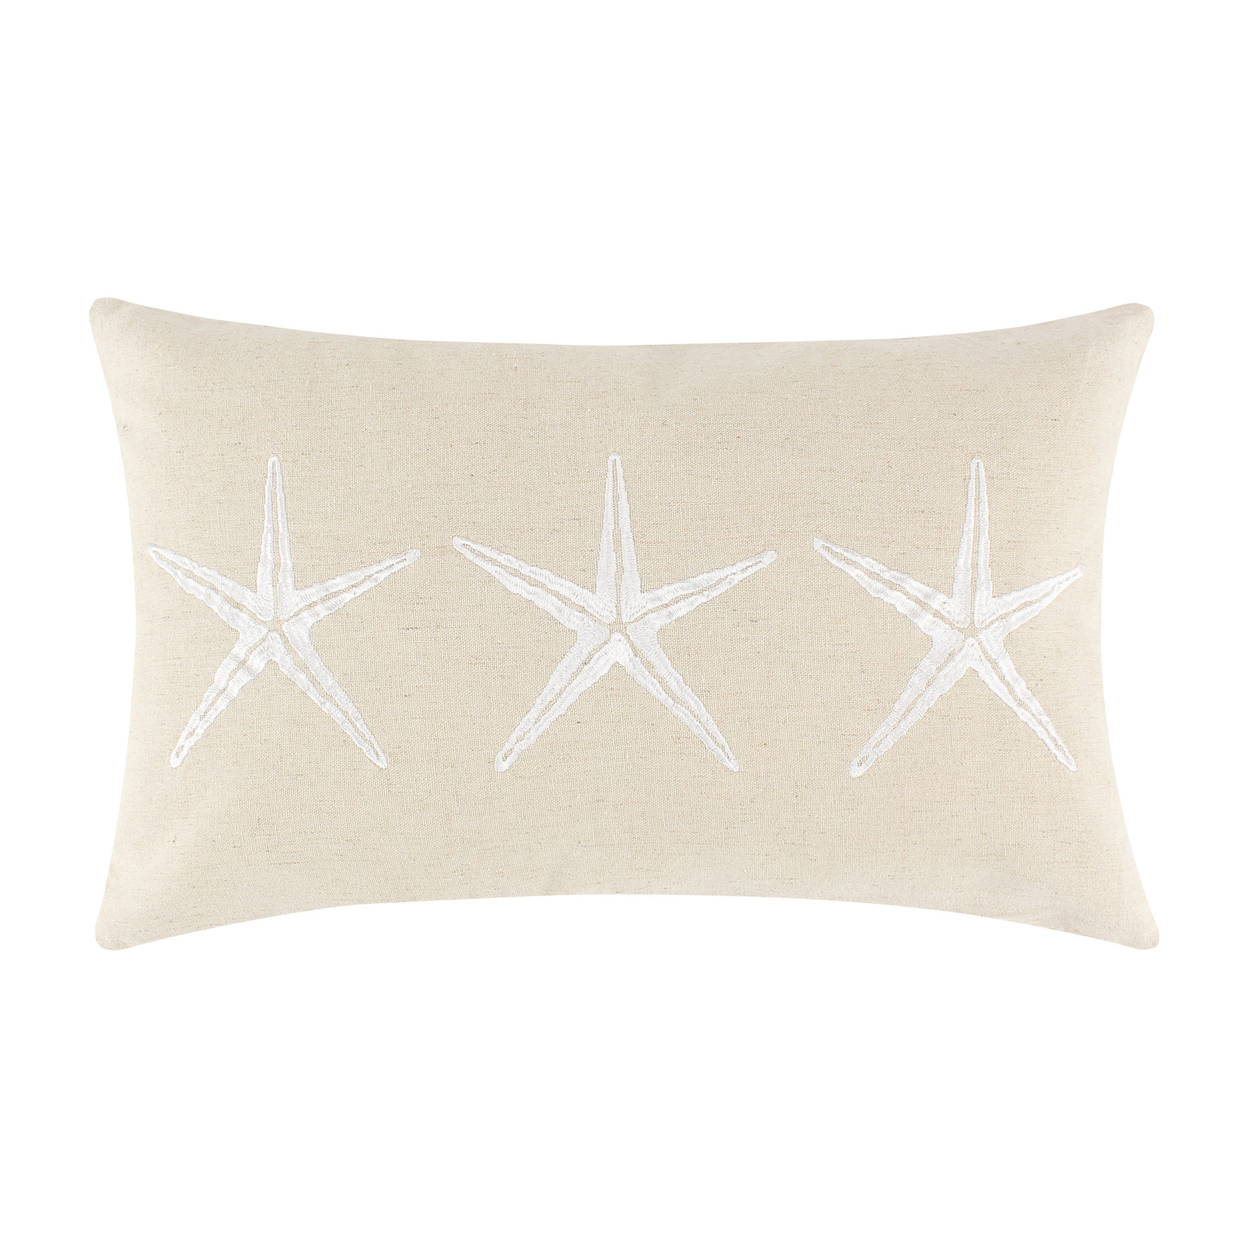 Polyester Throw Pillows, Stitched Seahorse And Starfish Design, Set Of 2, White Tassels, Blue, Beige